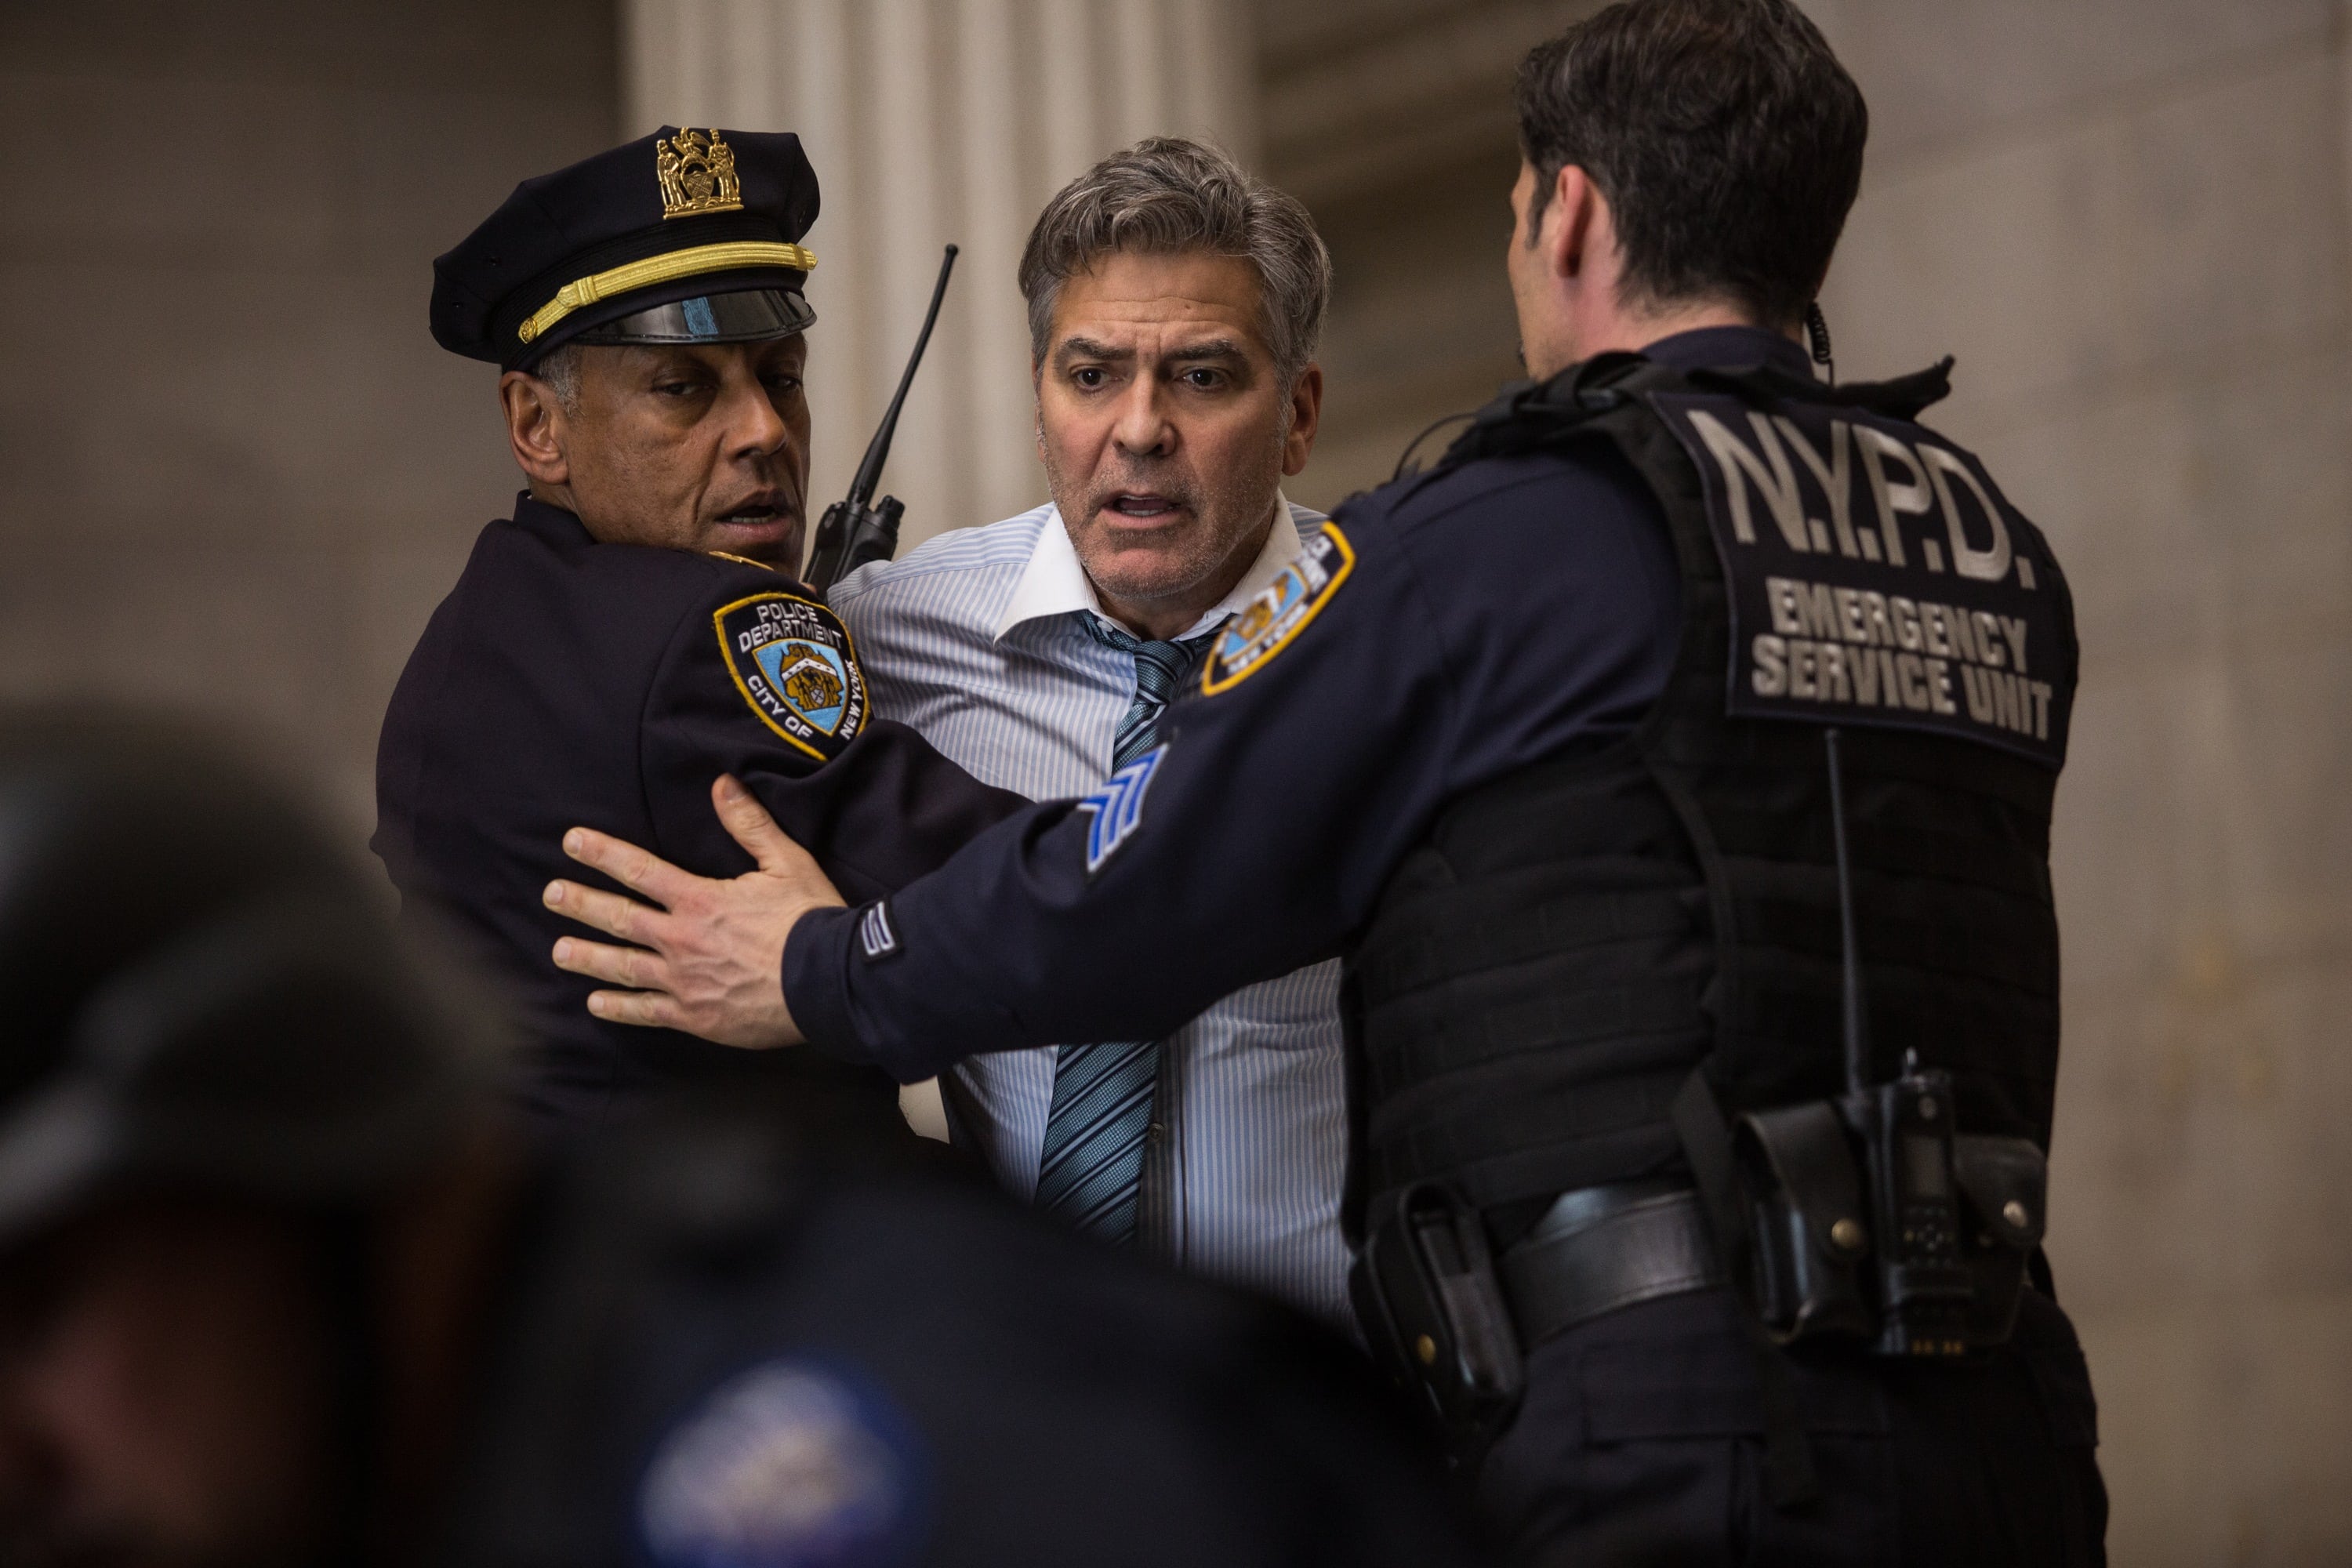 George Clooney (Lee Gates, center) stars with Giancarlo Esposito (Captain Marcus Powell, left) in TriStar Pictures' MONEY MONSTER.